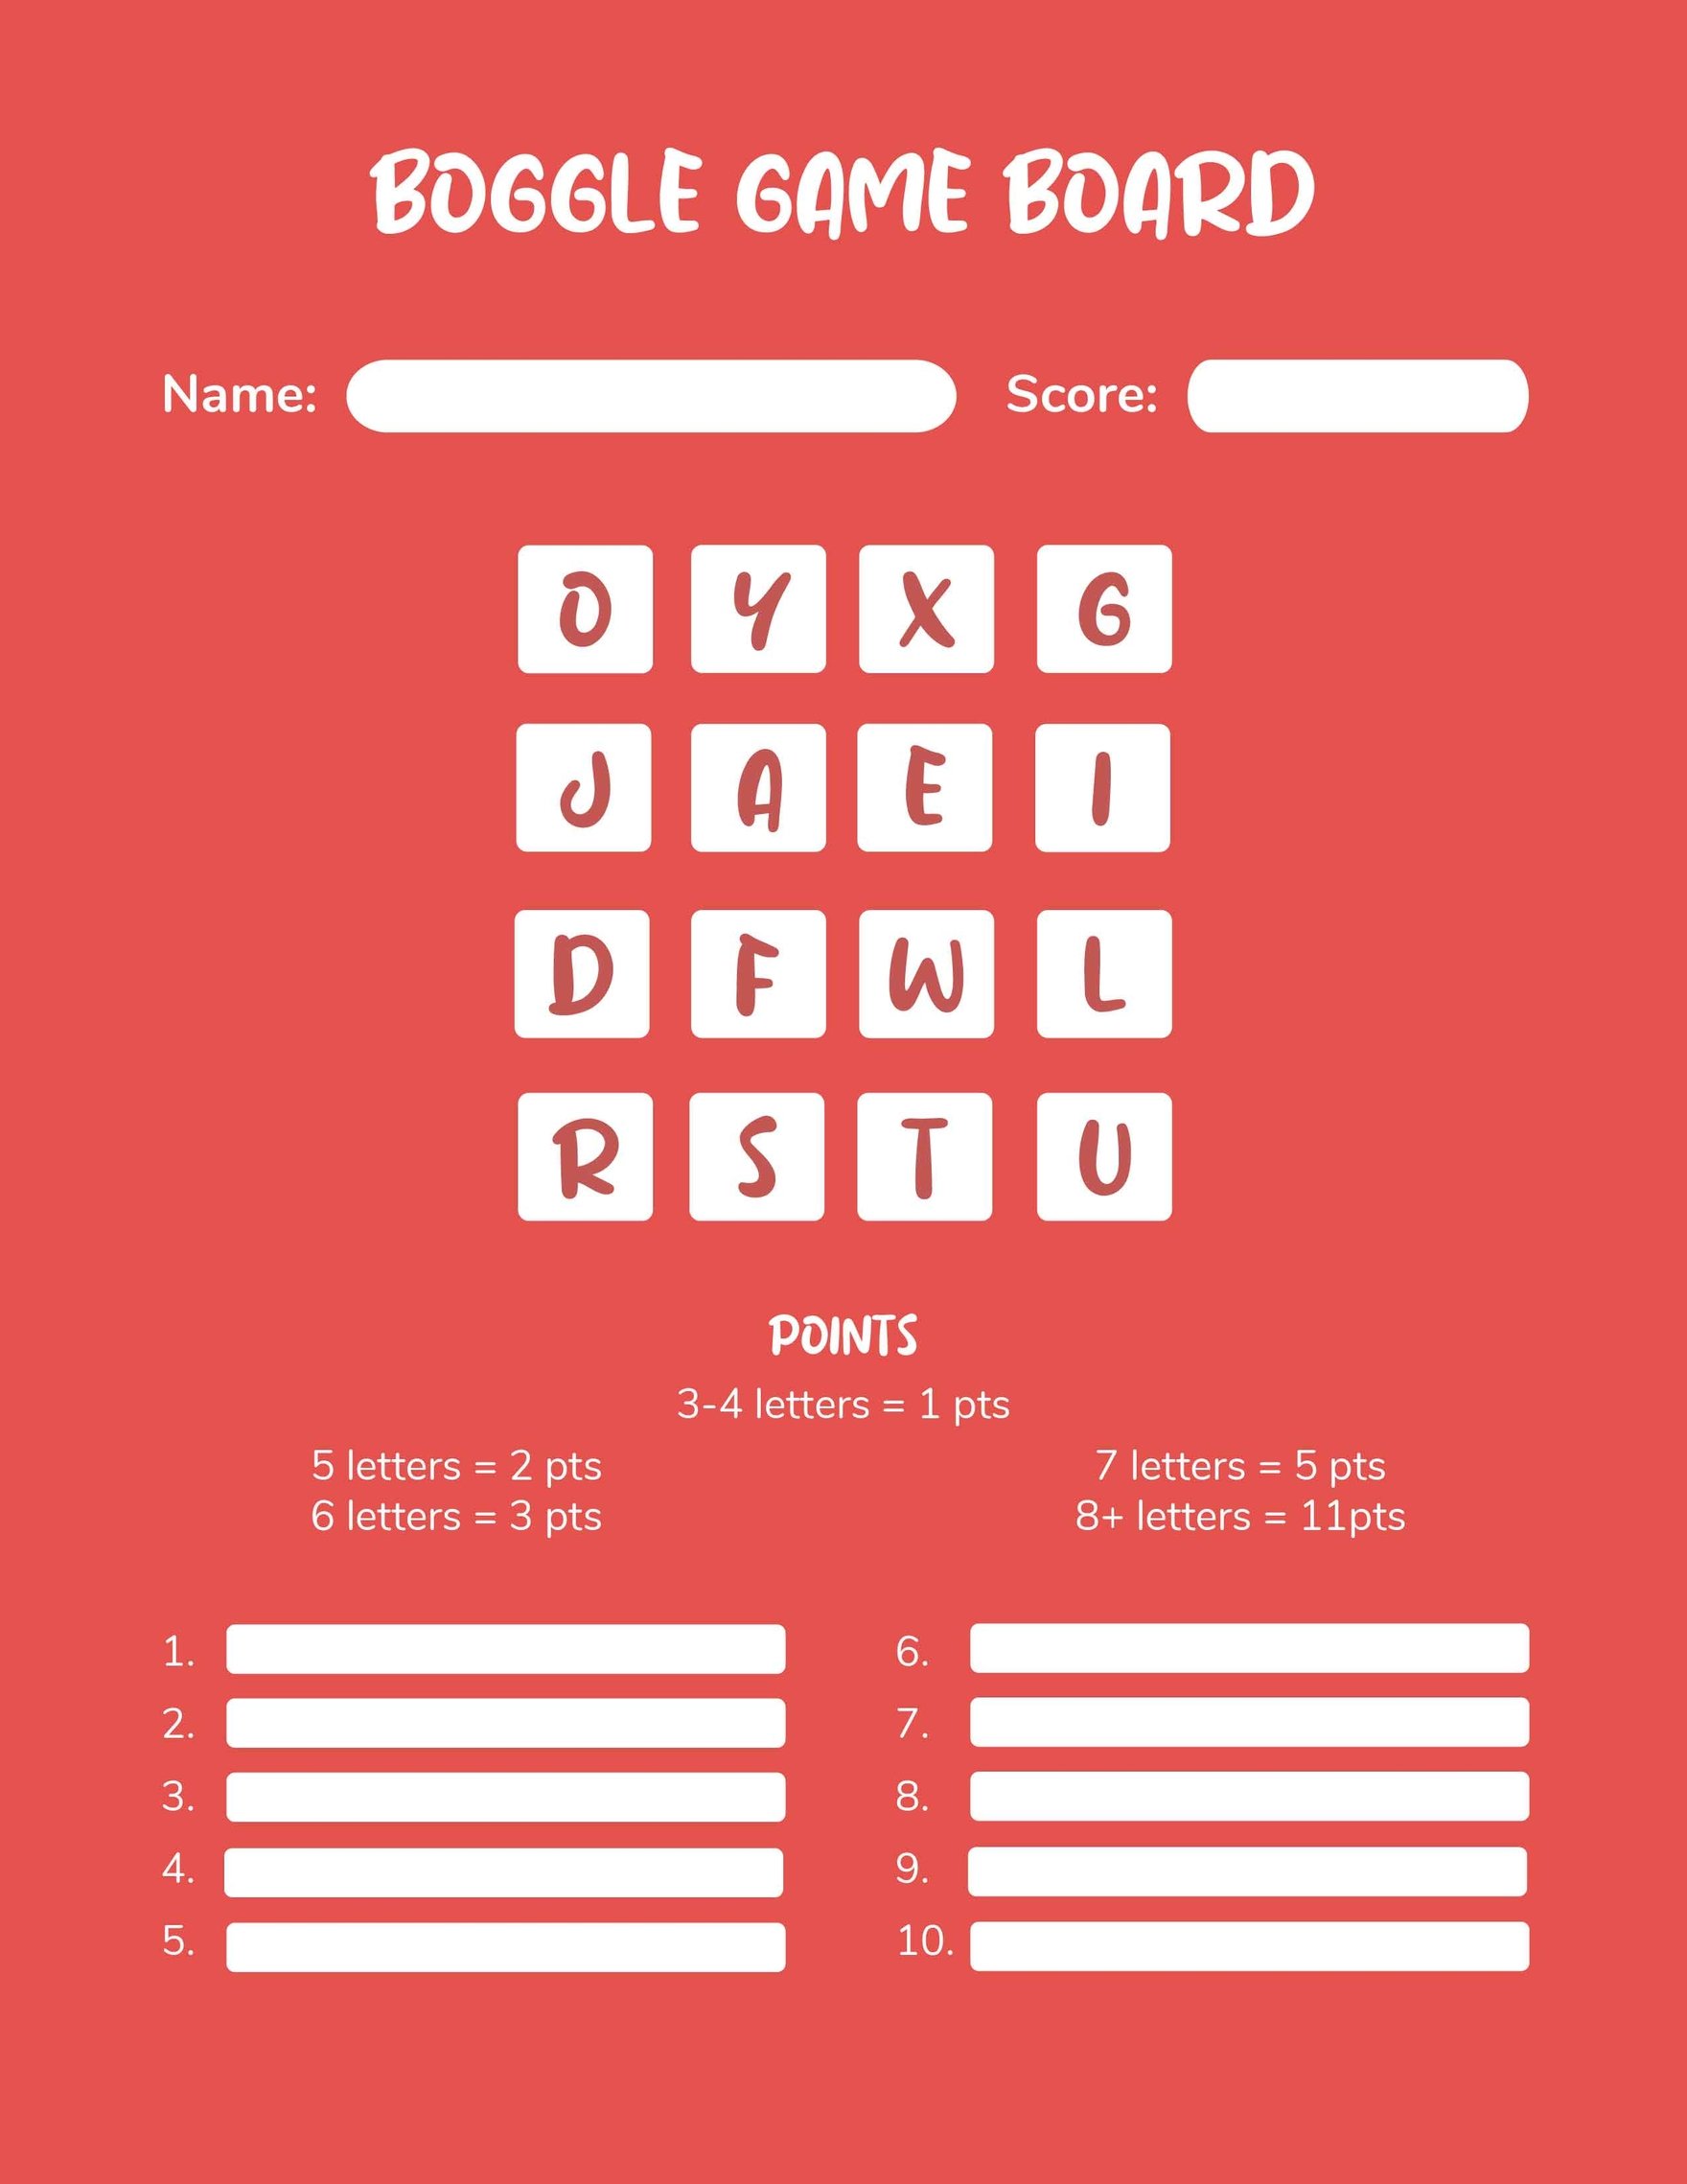 Boggle Game Board Template in Word, Google Docs, PDF, Apple Pages